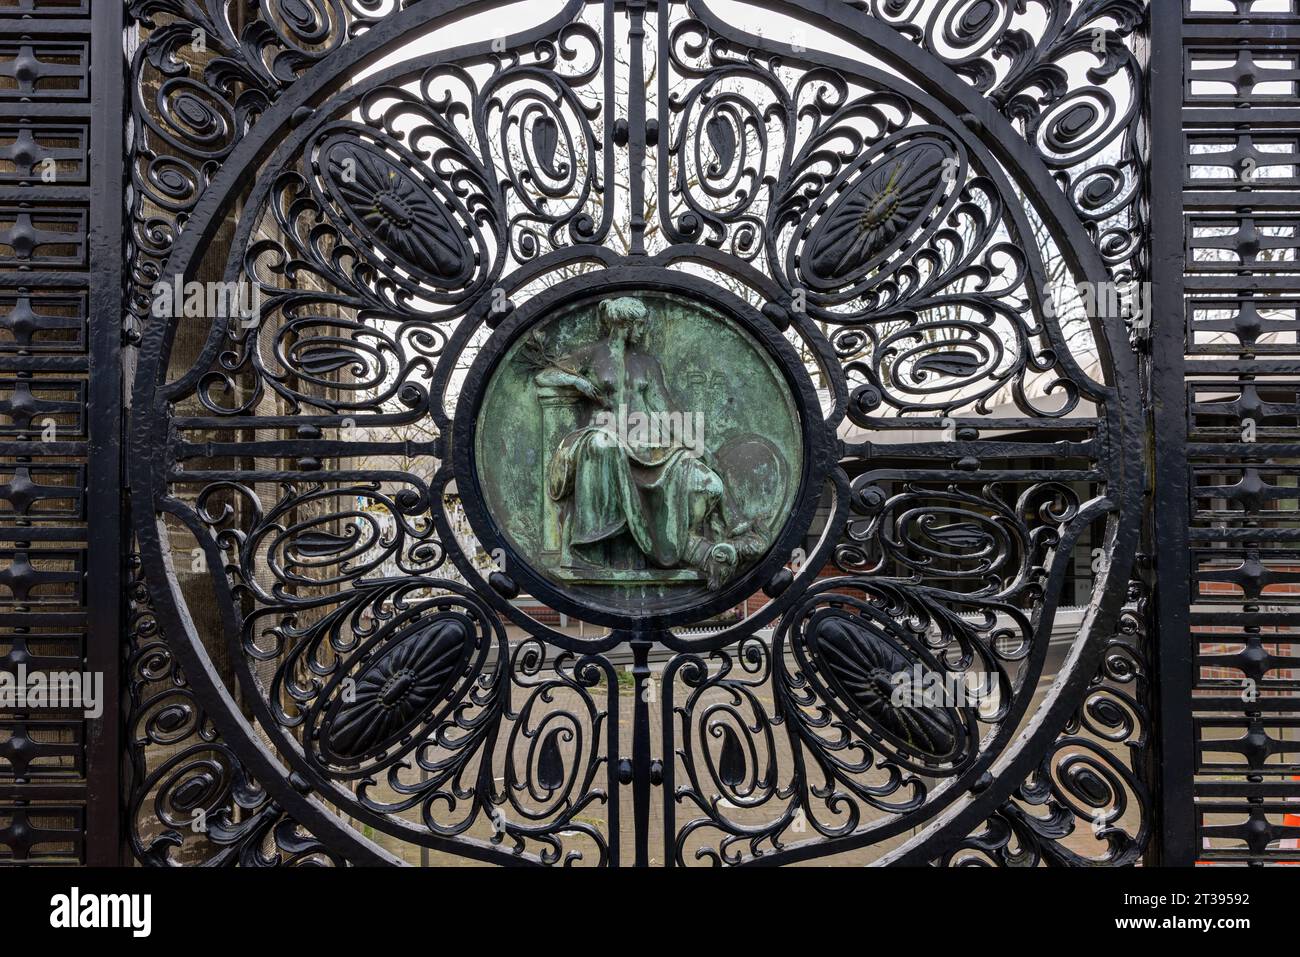 The Hague, Netherlands - April 17, 2023: Figure of Peace (Pax) on the black wrought iron gates of the Peace Palace in The Hague, which houses the Inte Stock Photo